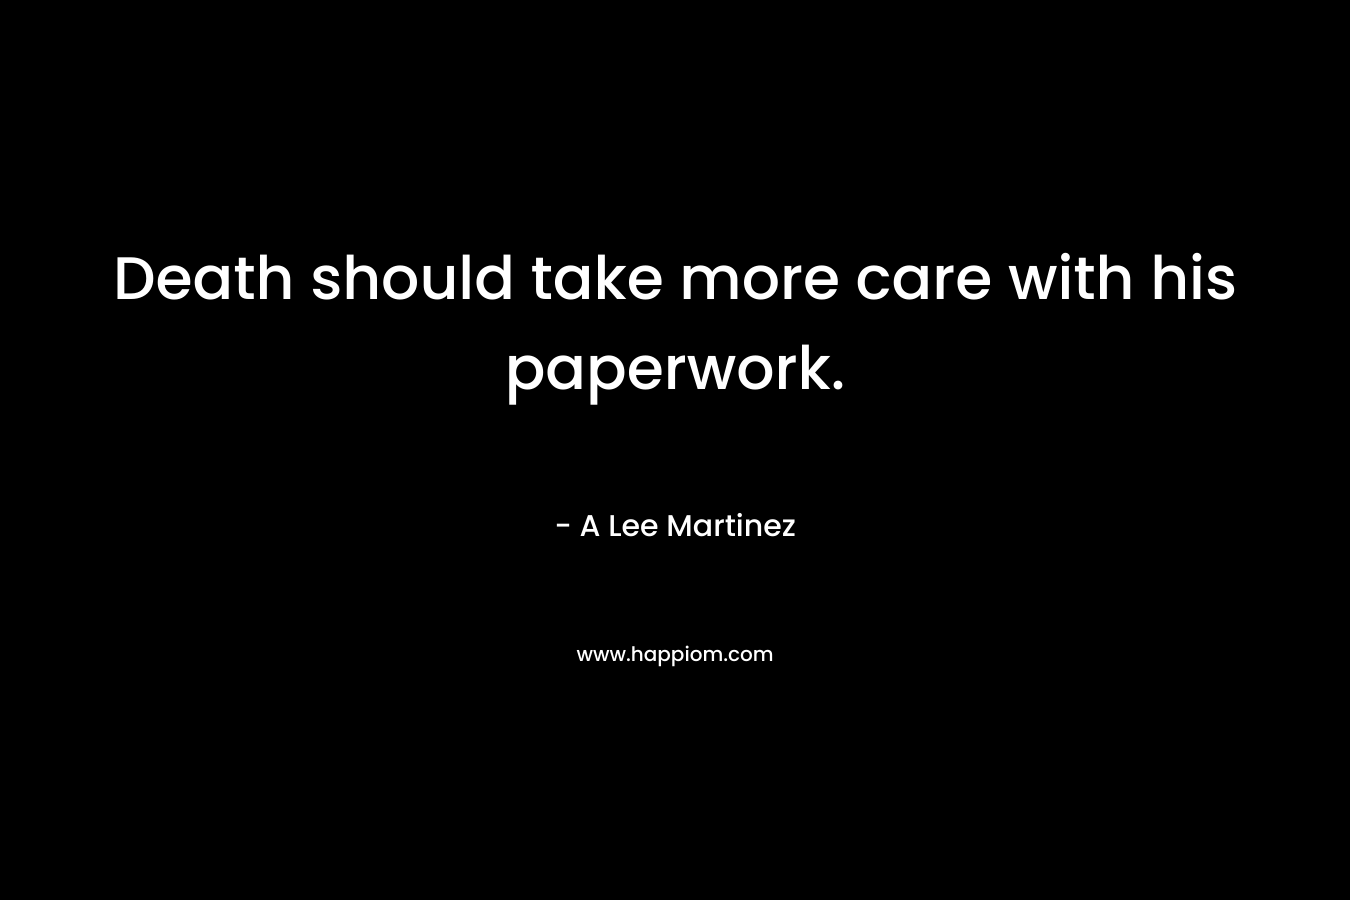 Death should take more care with his paperwork. – A Lee Martinez